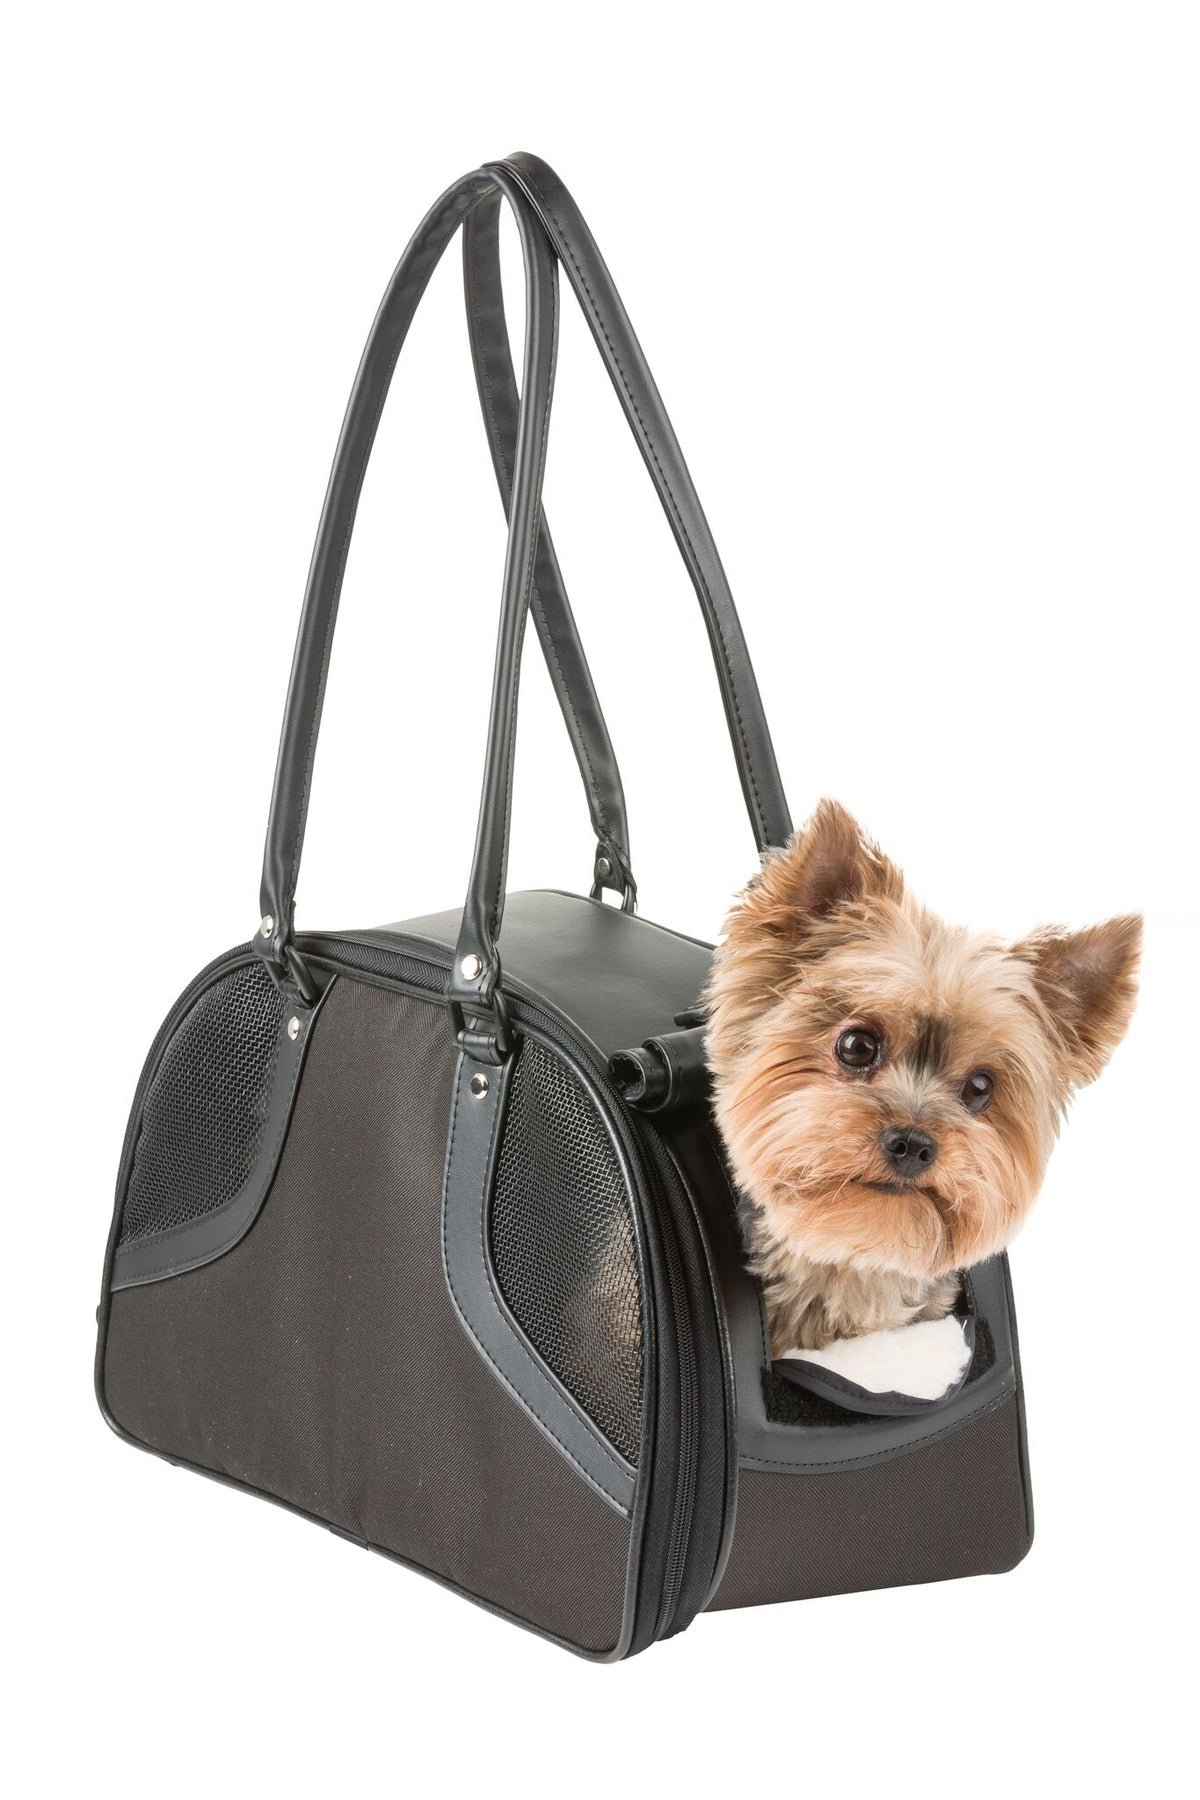 Roxy Black Carrier - 3 Red Rovers